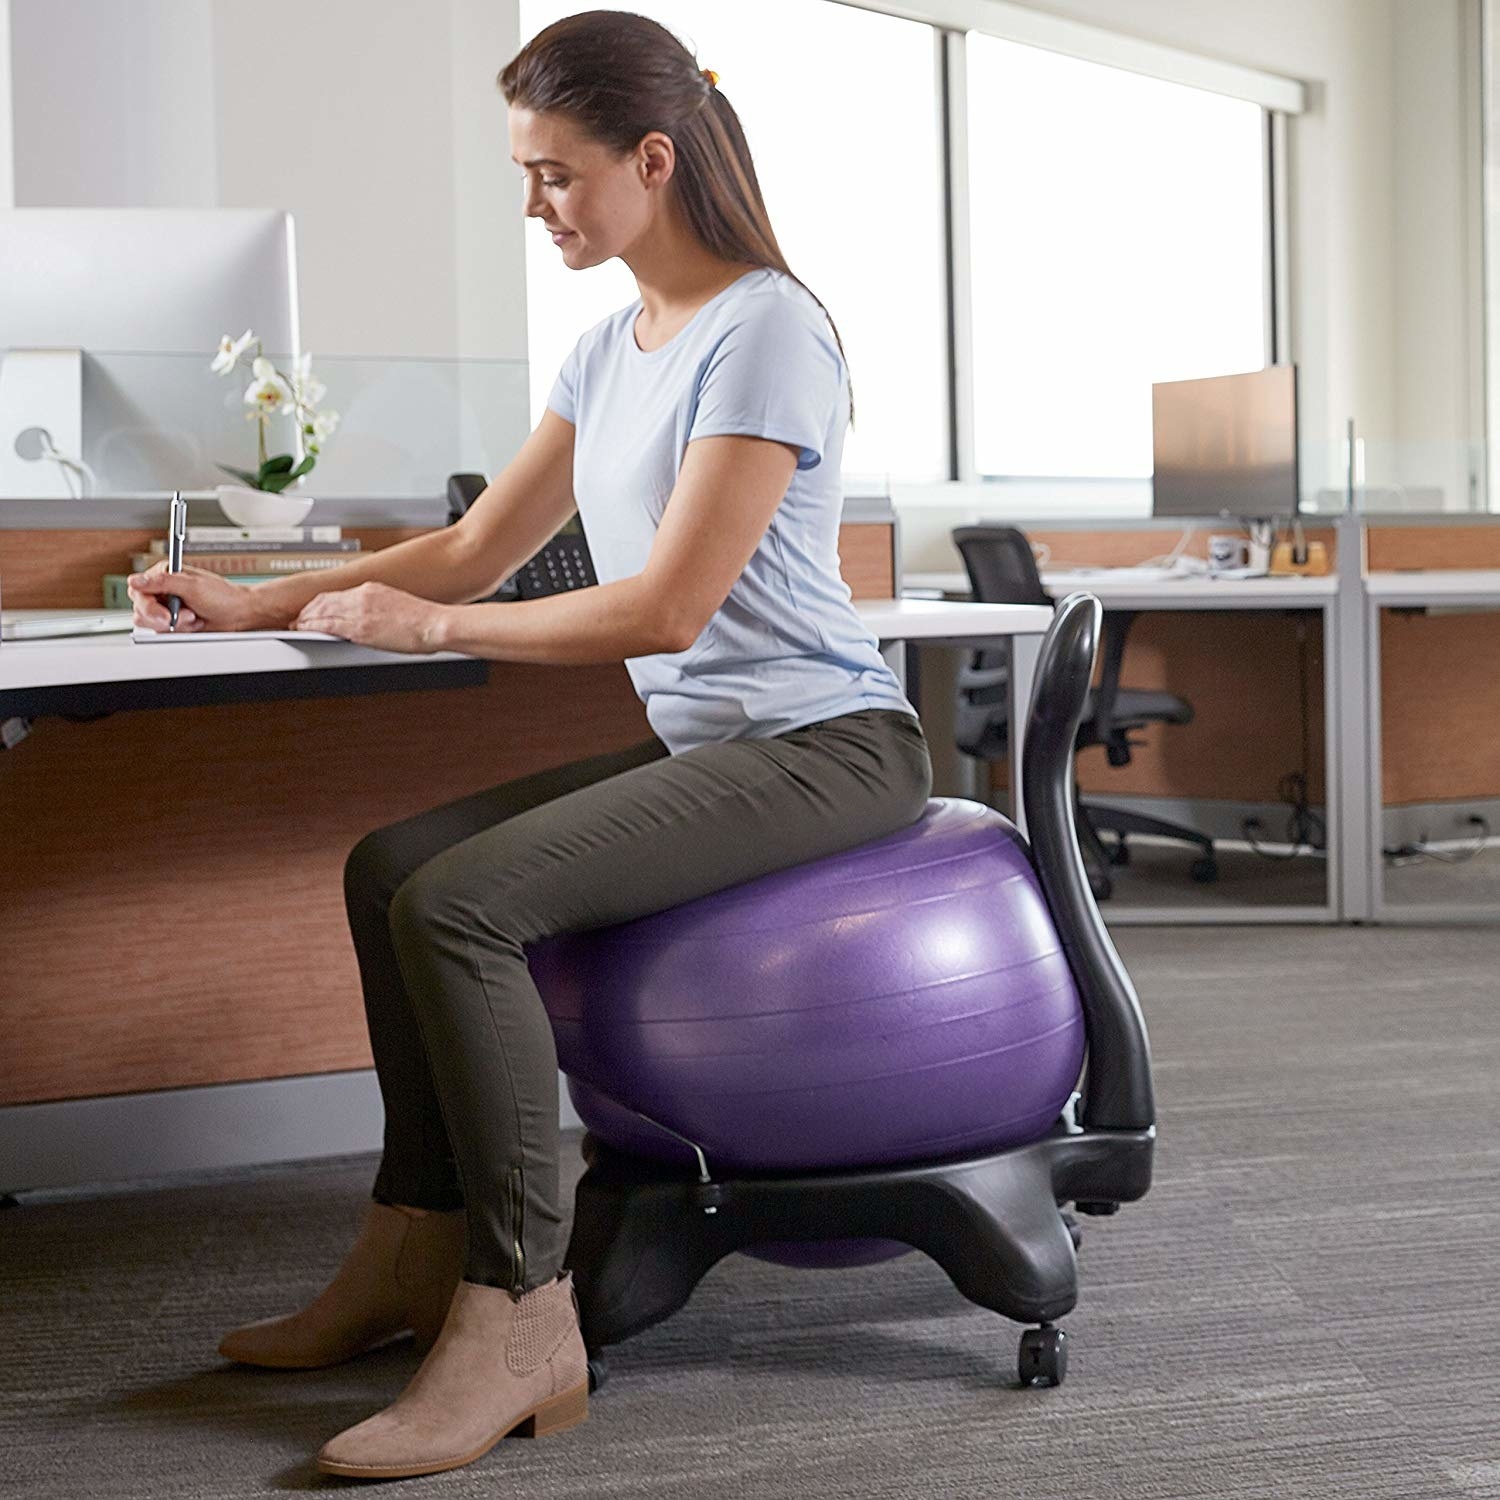 A person sitting on the ball chair at their desk